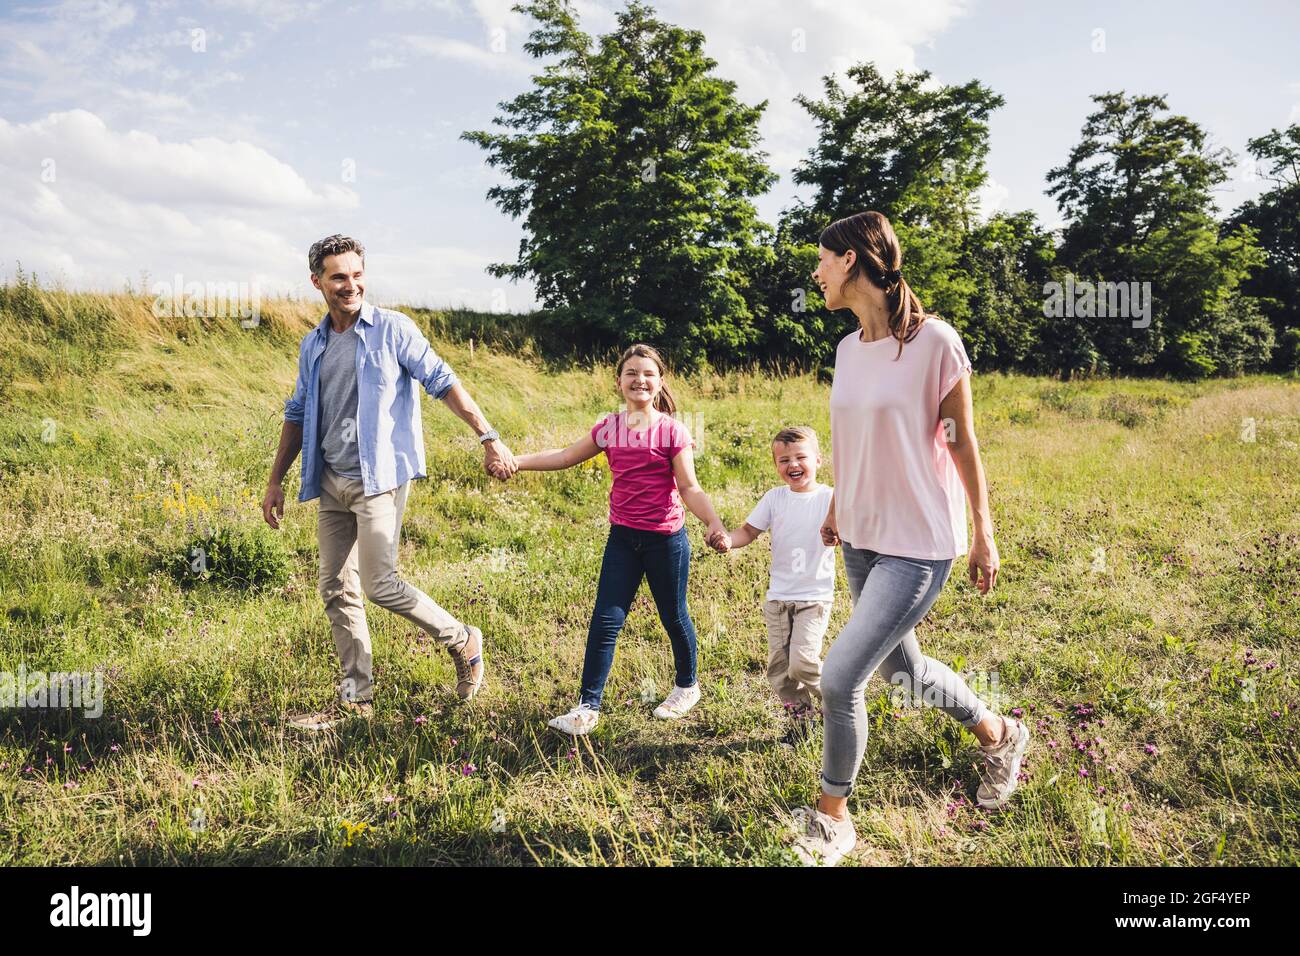 Smiling family holding hands while walking on grass Stock Photo